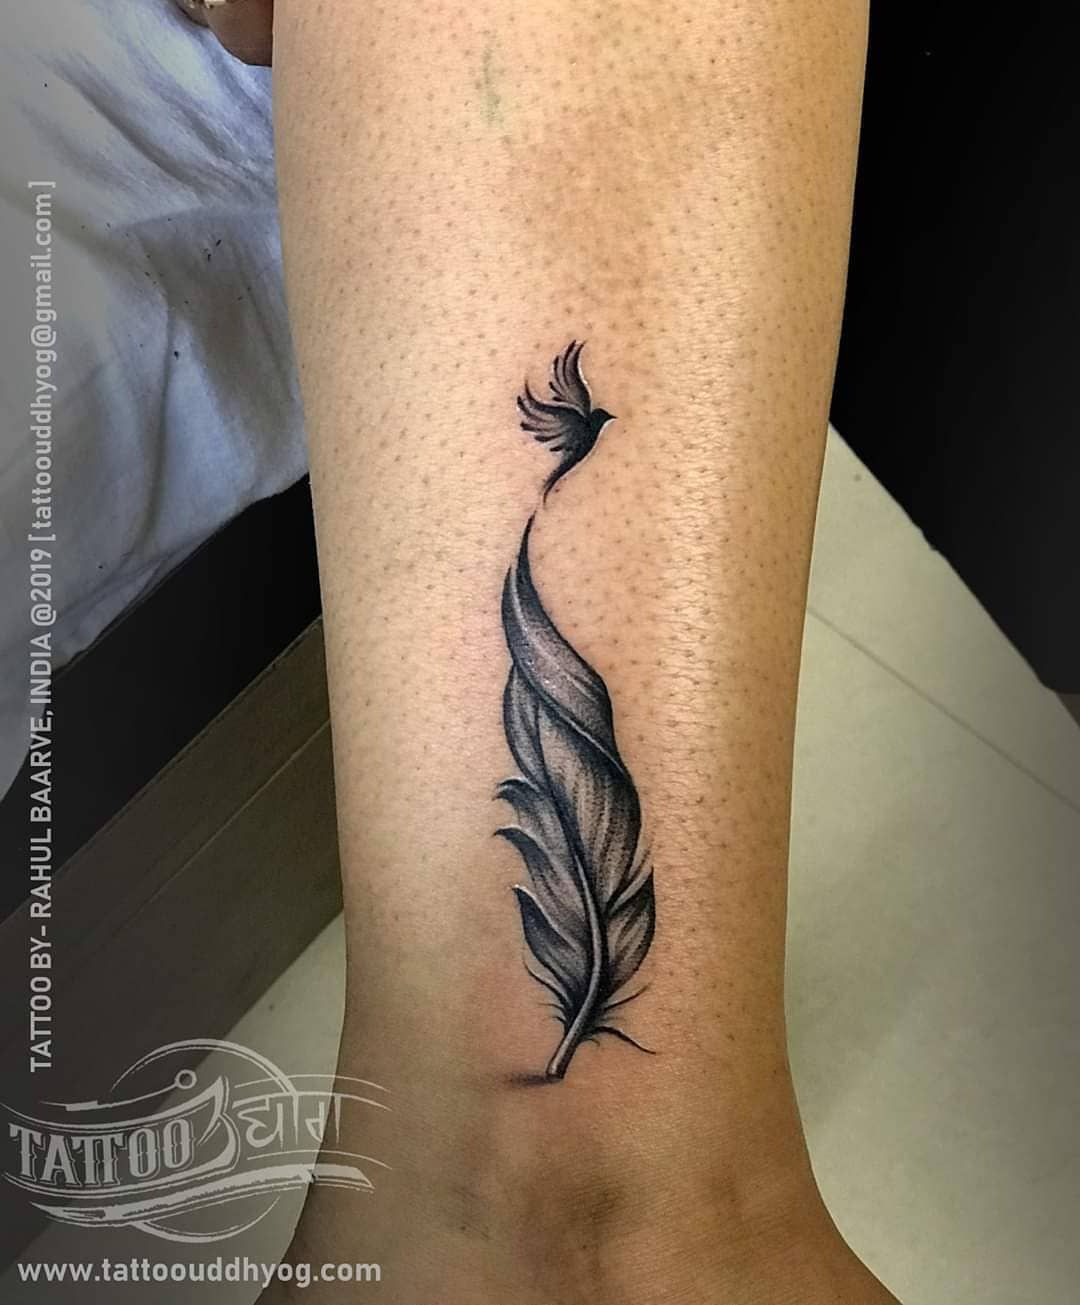 101 Amazing Feather Tattoo Designs You Need To See! | Outsons | Men's Fashion Tips And Style Guide For 2020